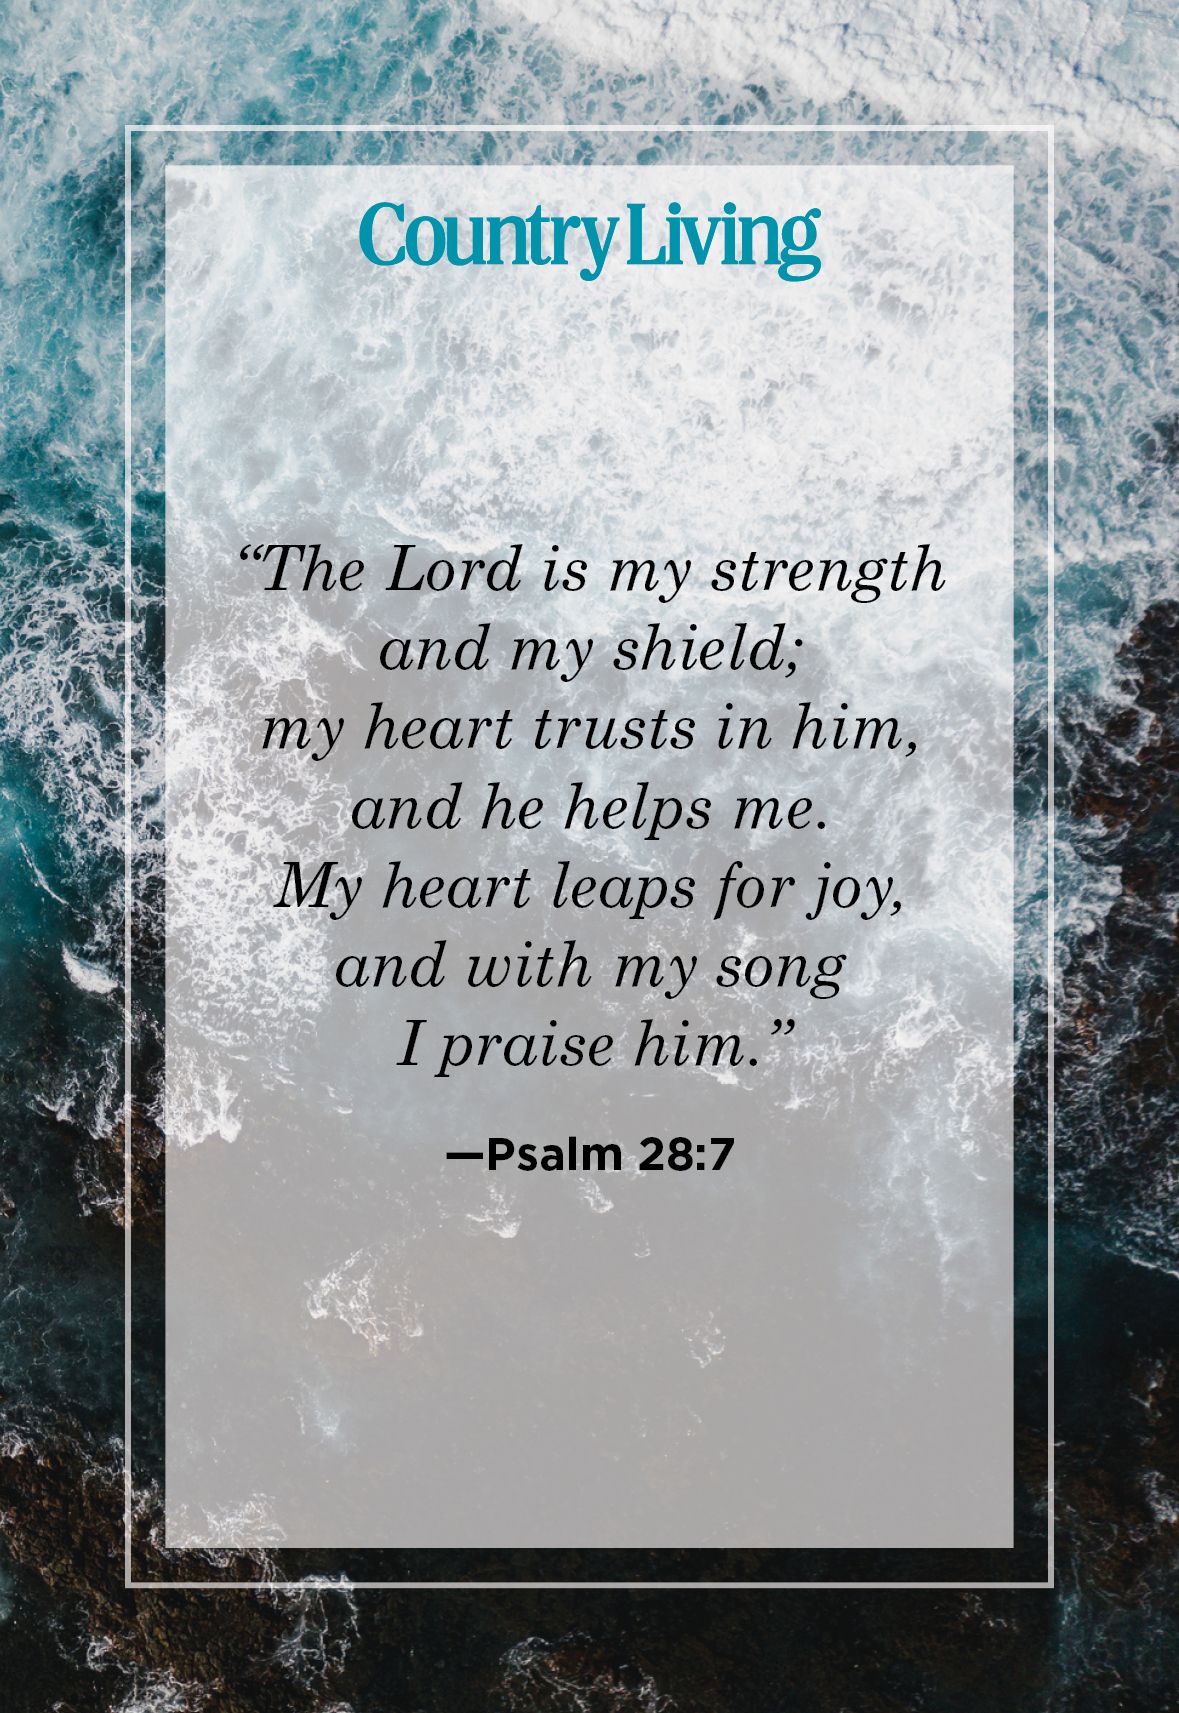 joy of the lord is your strength